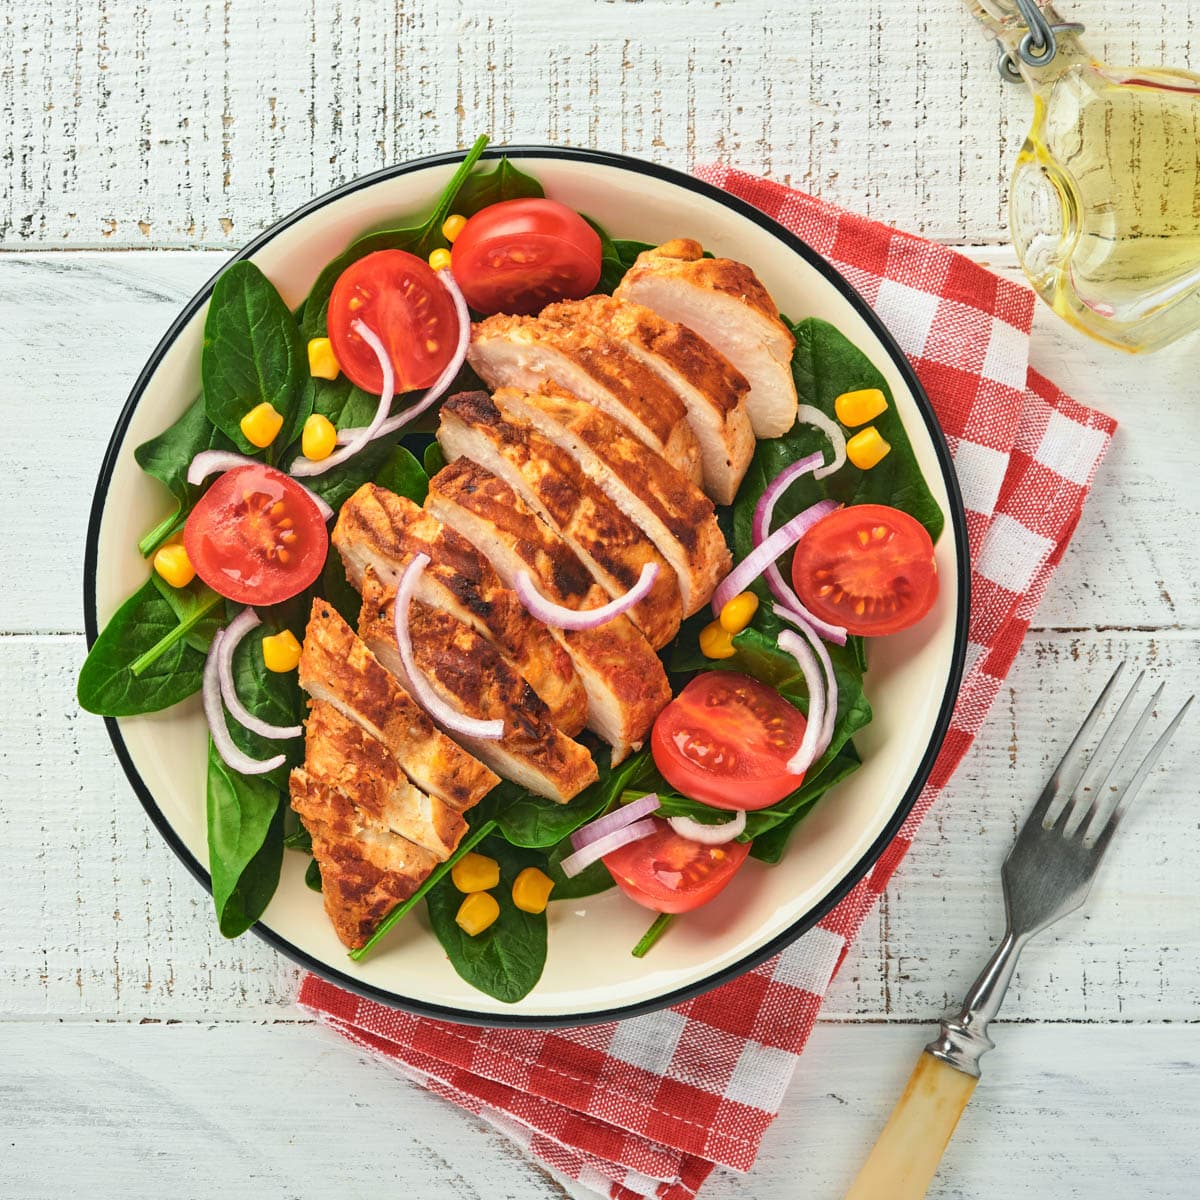 Salad with fresh spinach, tomatoes ad grilled chicken.